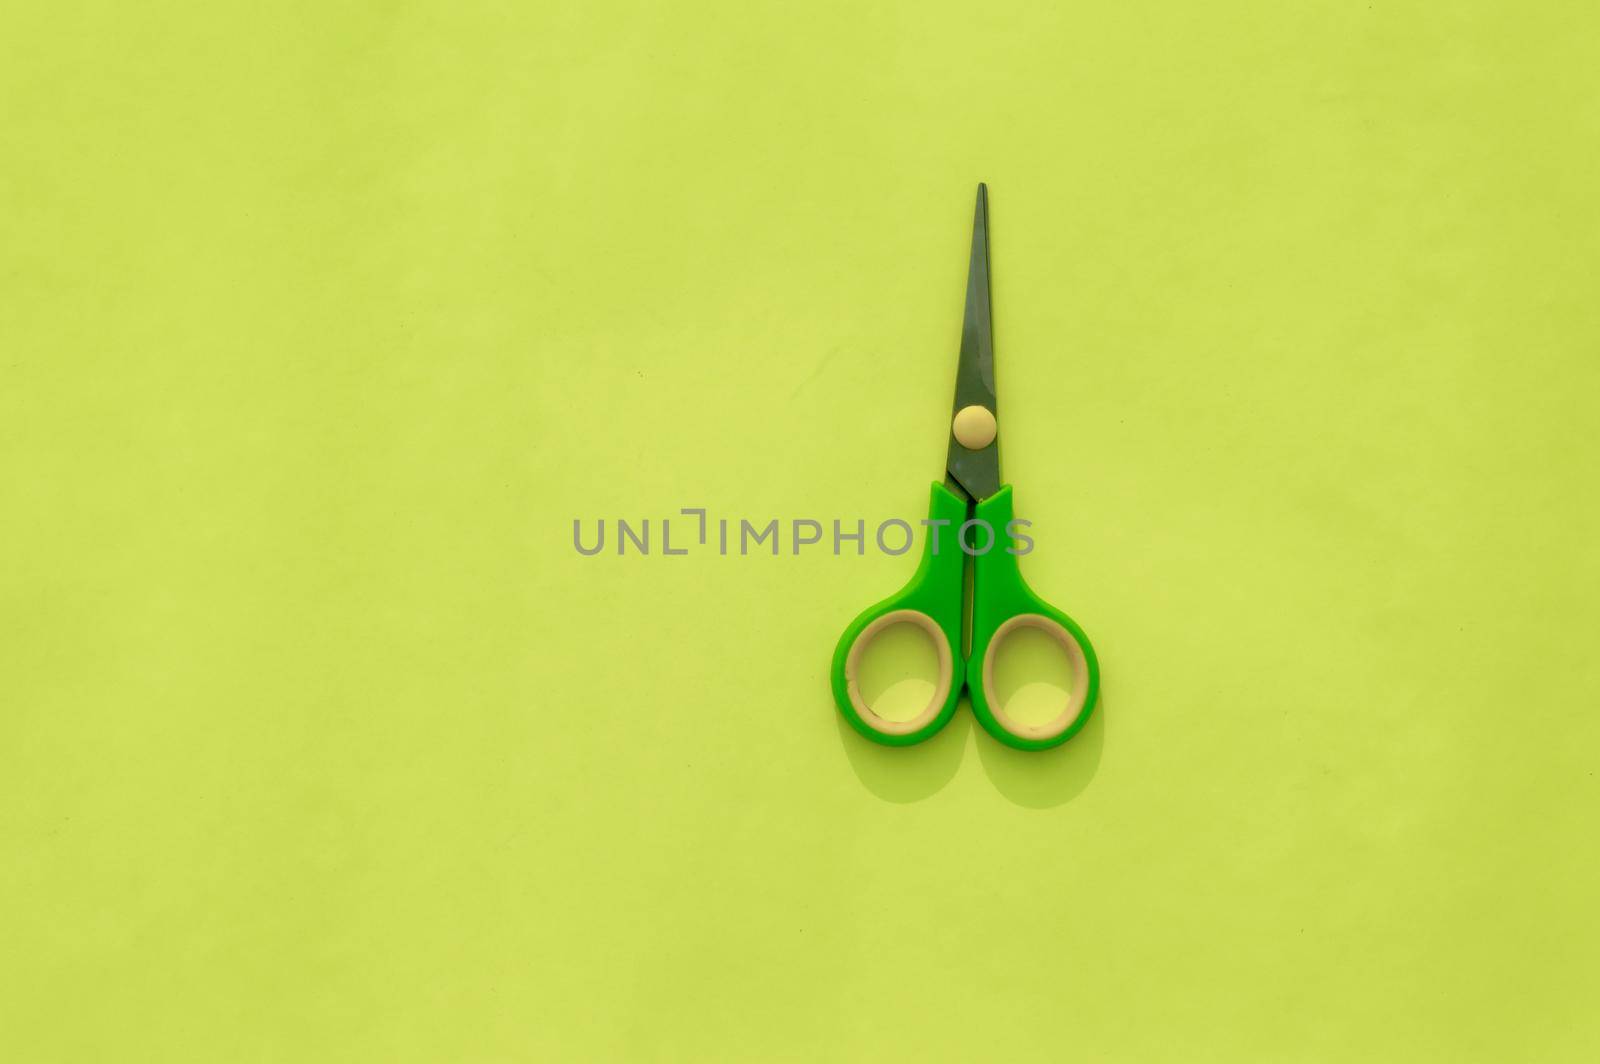 Green scissors isolated on Light green background. Table top view. Copy space for text. by sudiptabhowmick